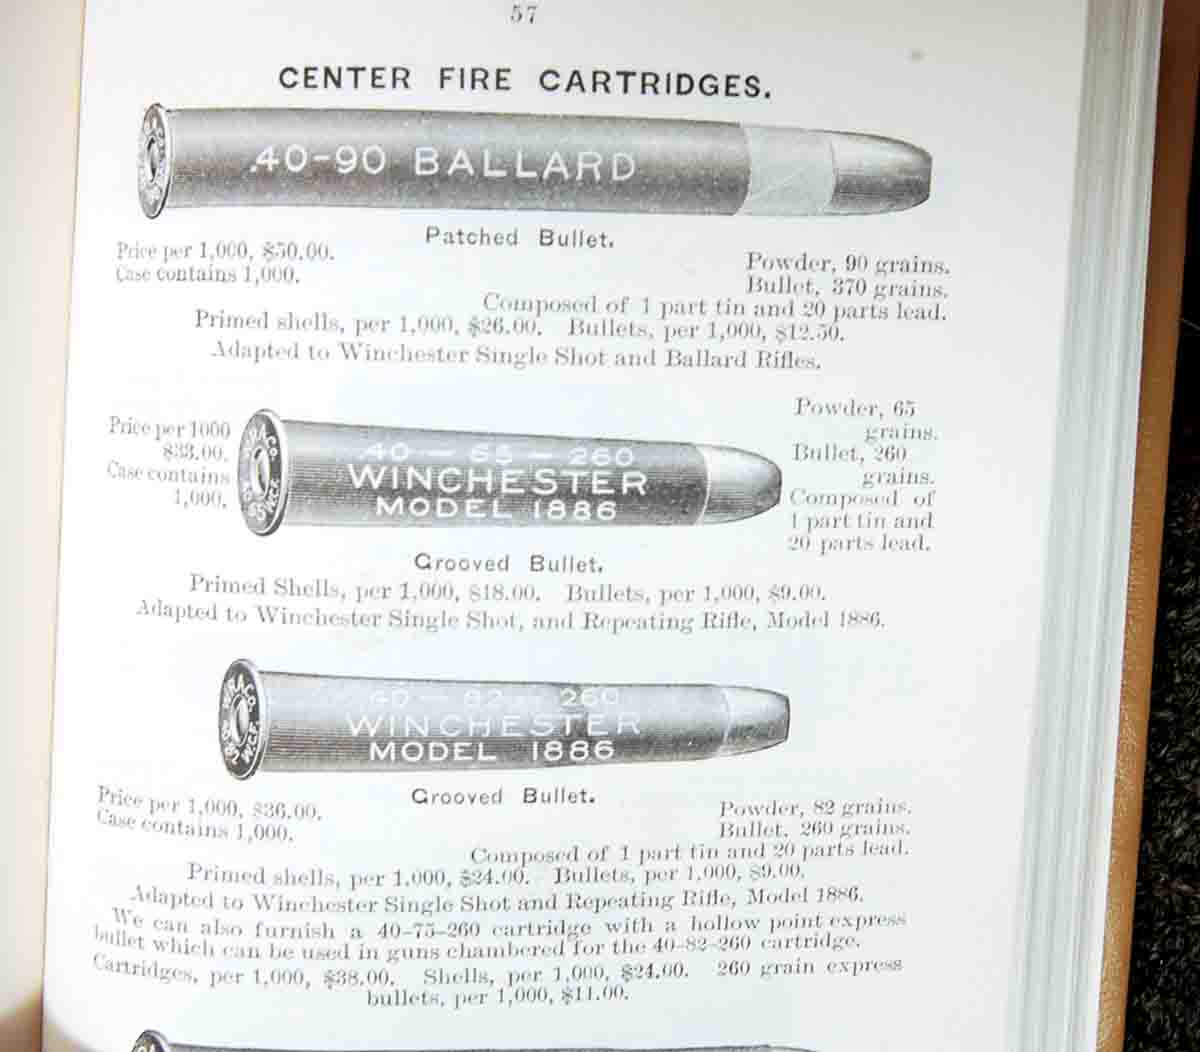 The June 1887 Winchester catalog page showed the first illustration of the .40-65-260 Winchester cartridge.